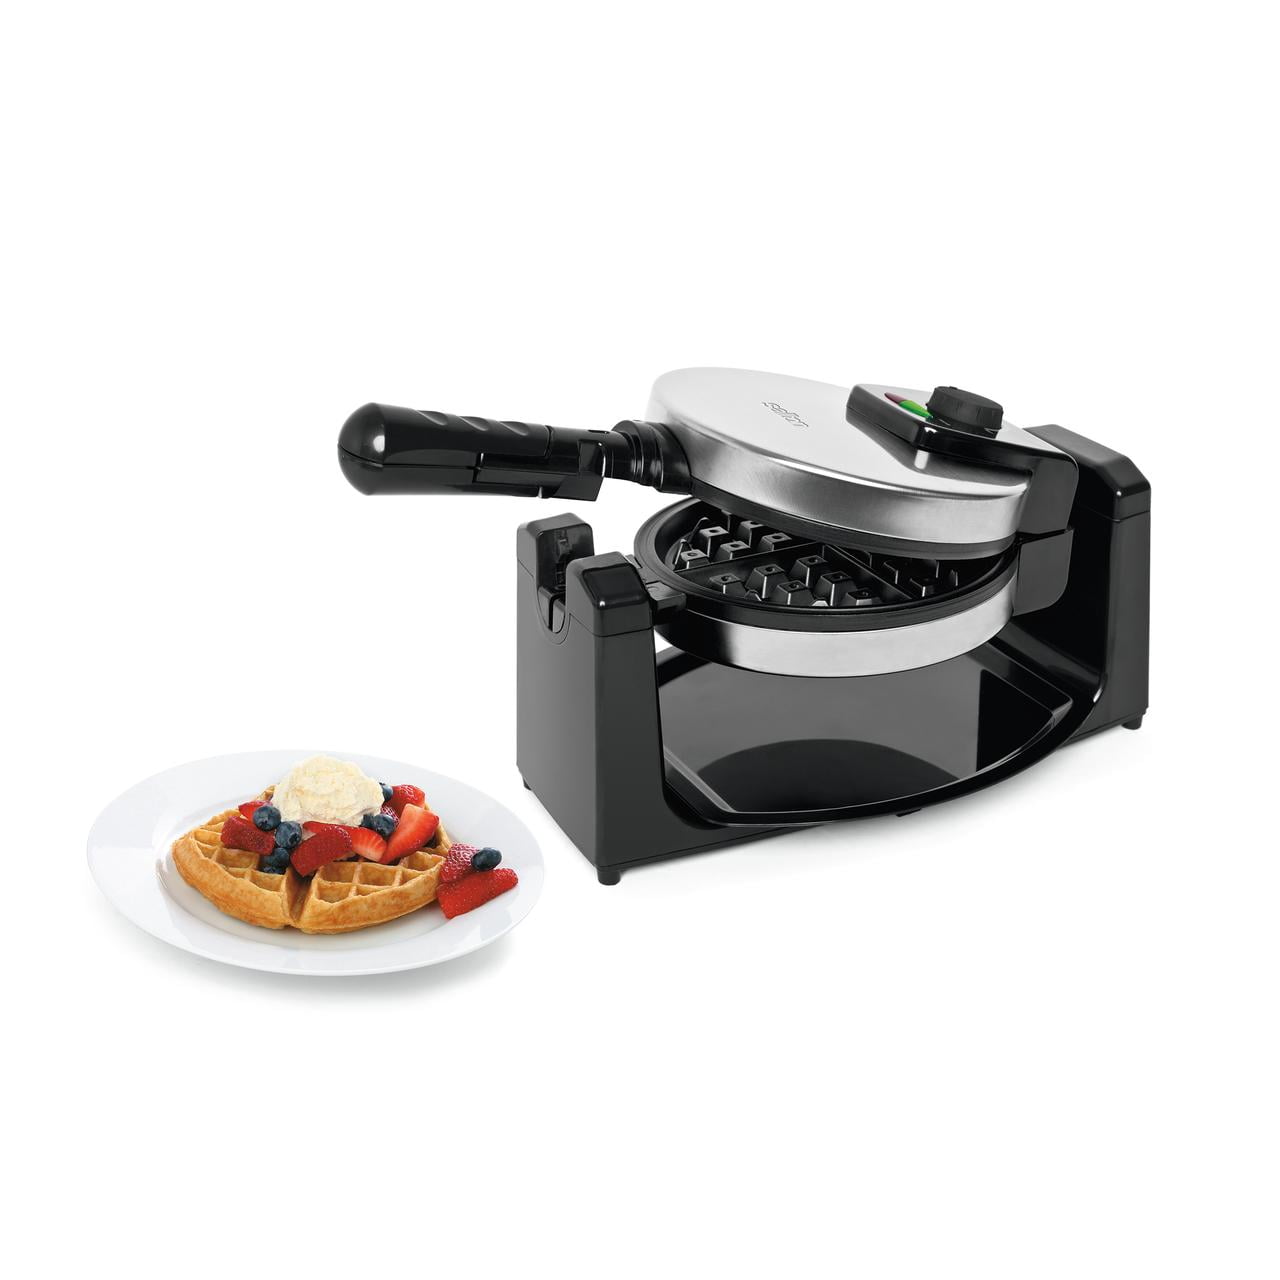 ALDKitchen Bubble Waffle Maker | Egg Waffle Maker Mold | Replaceable 180 Degree Rotating Waffe Iron | Nonstick